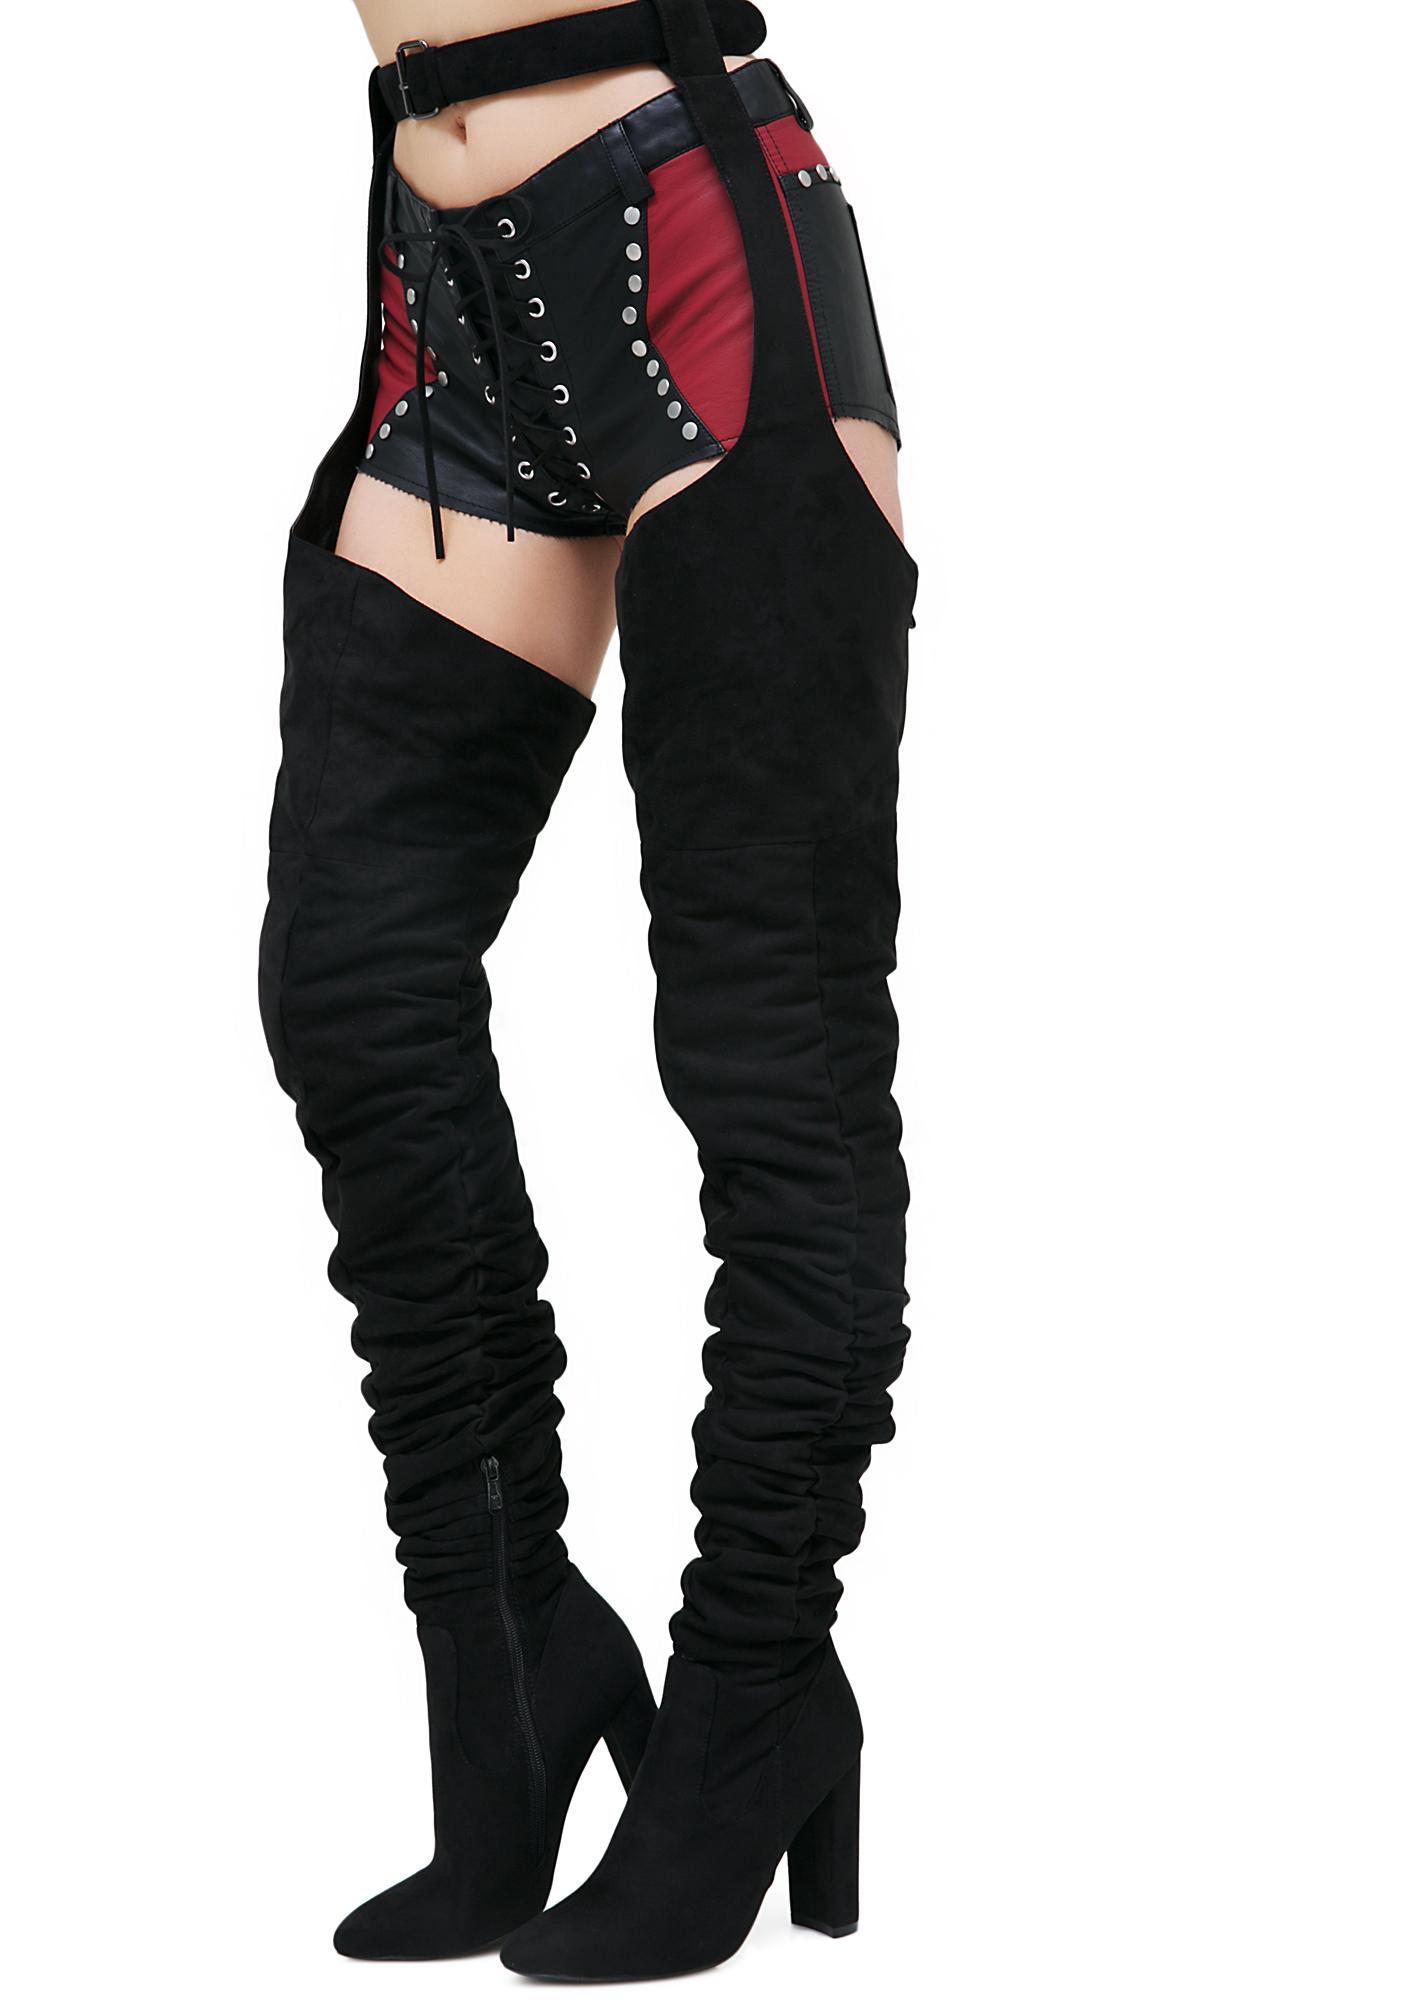 belted chap thigh high boots